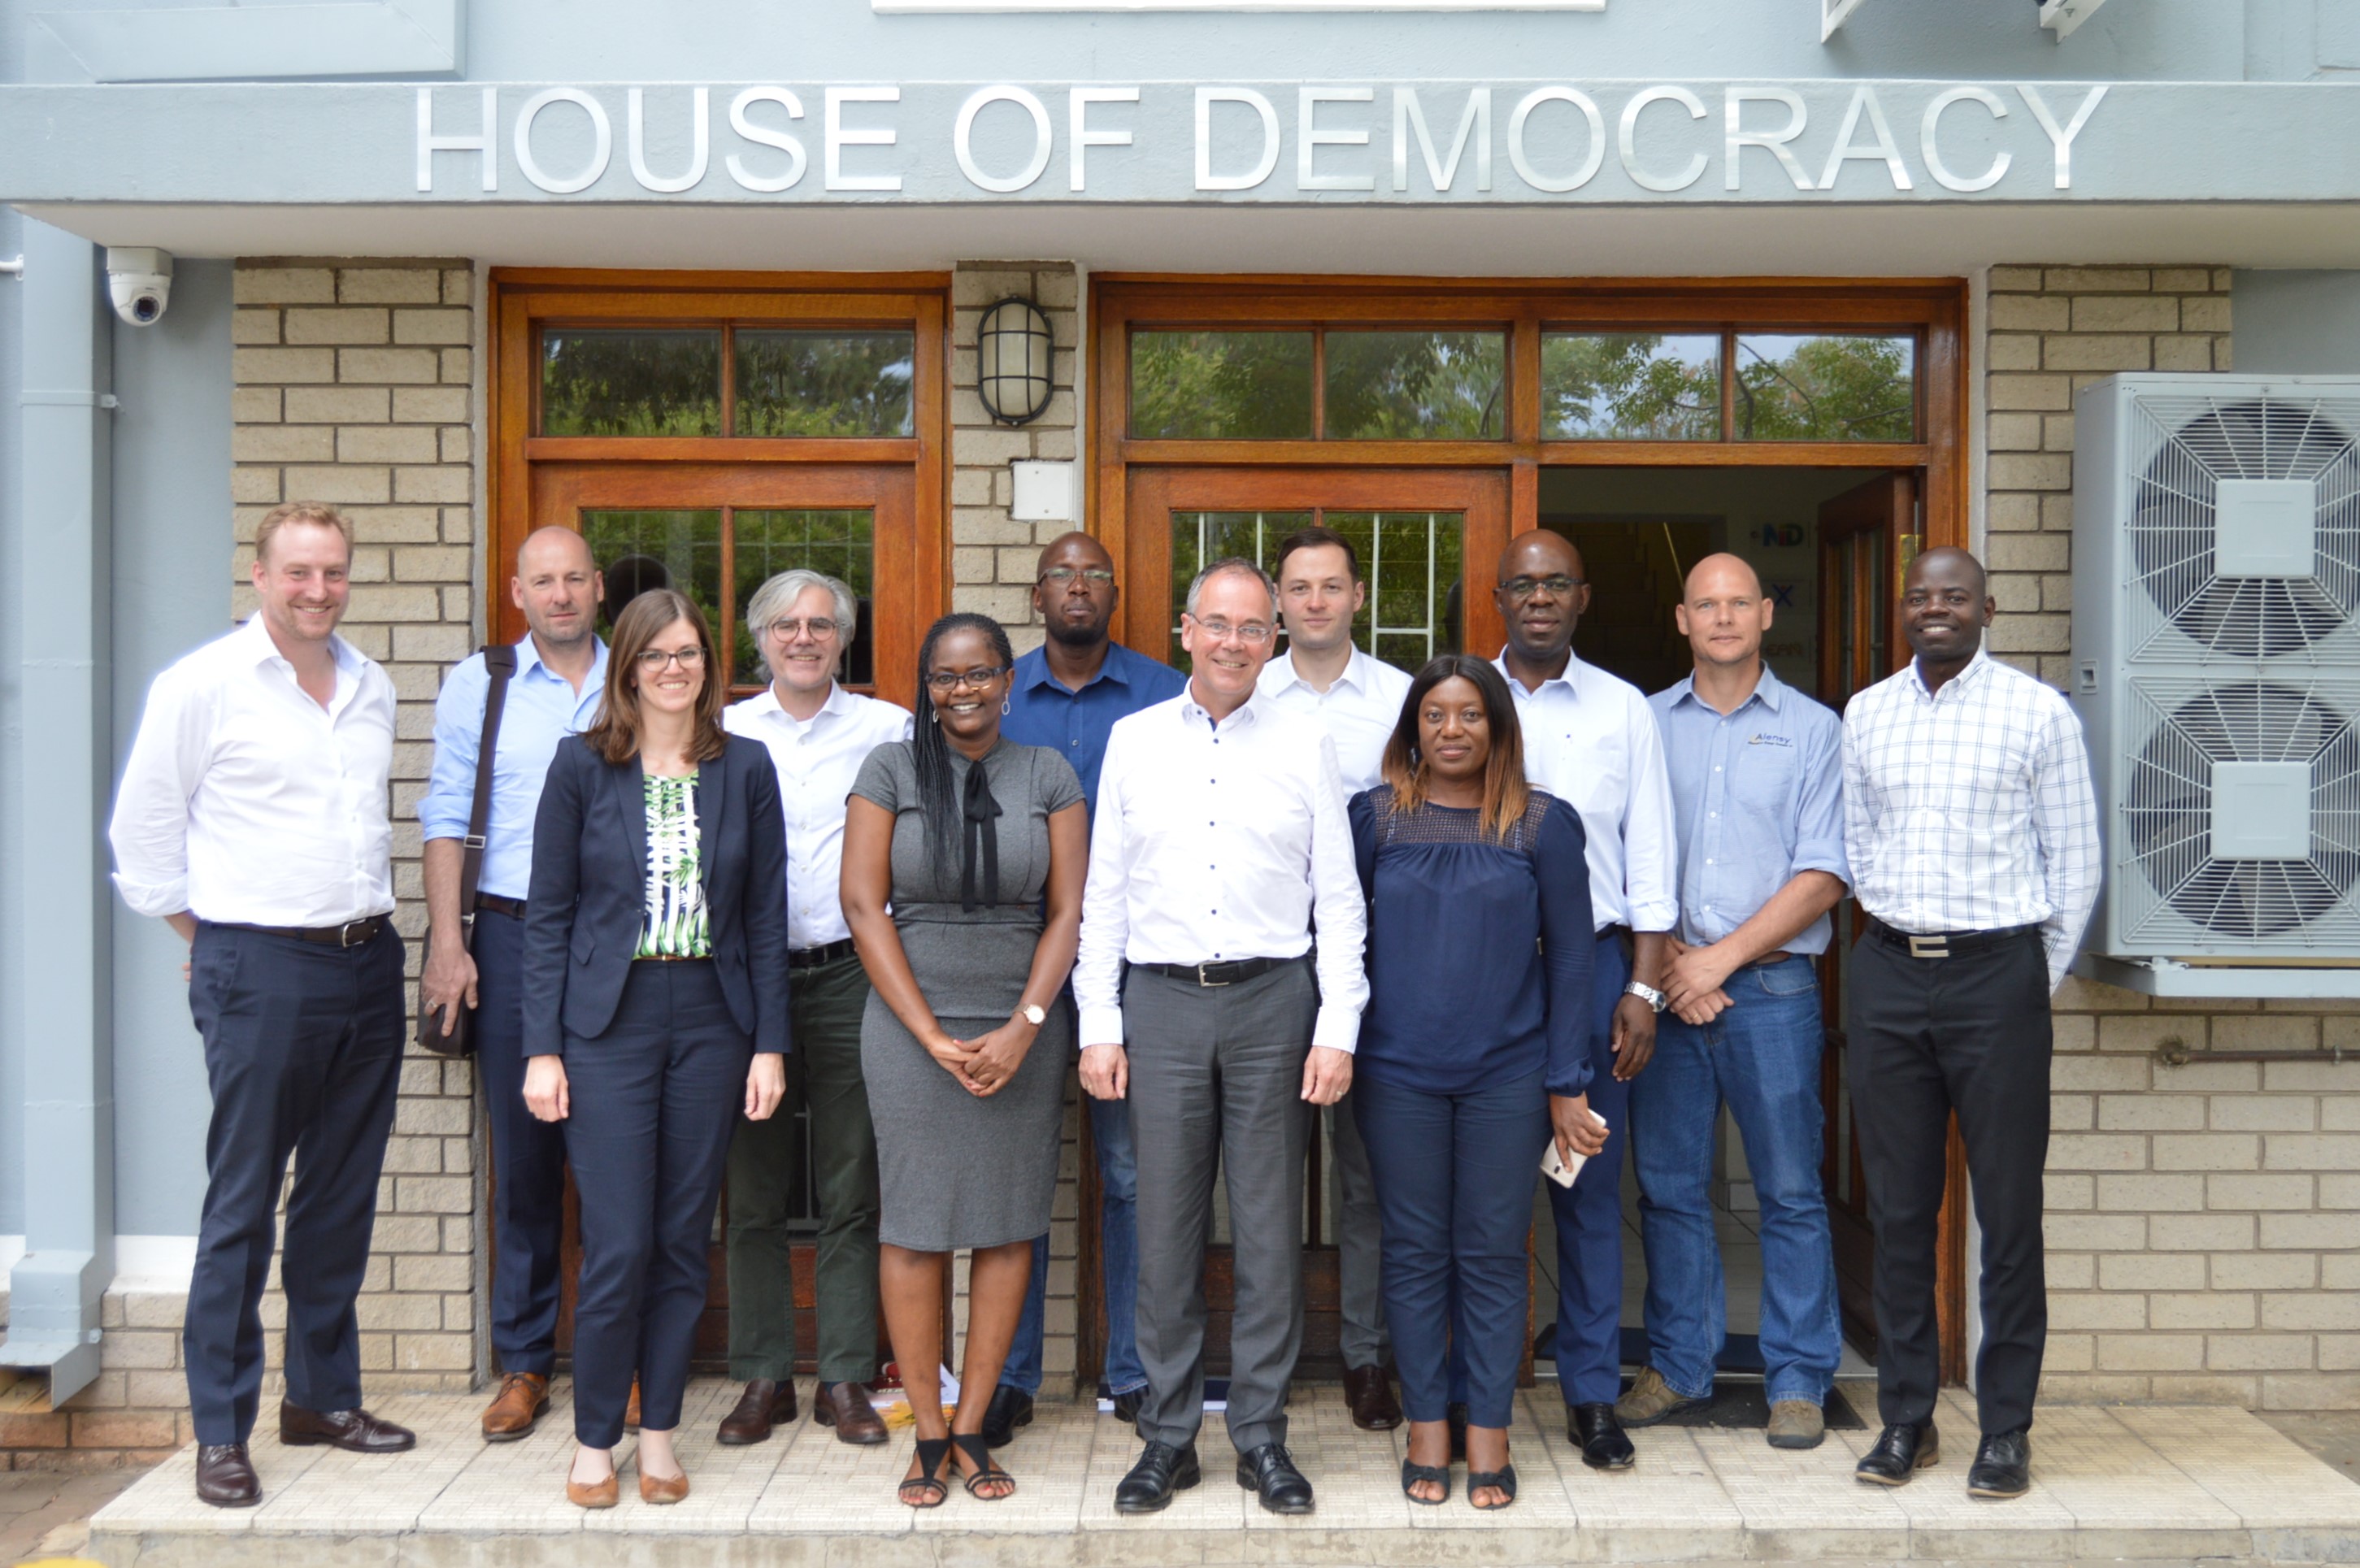 The PROCEED project team preparing the joint project in the "House of Democracy" of the Hanns Seidel Foundation in Windhoek, March 2019. © Dr. Clemens von Doderer, HSS Namibia.